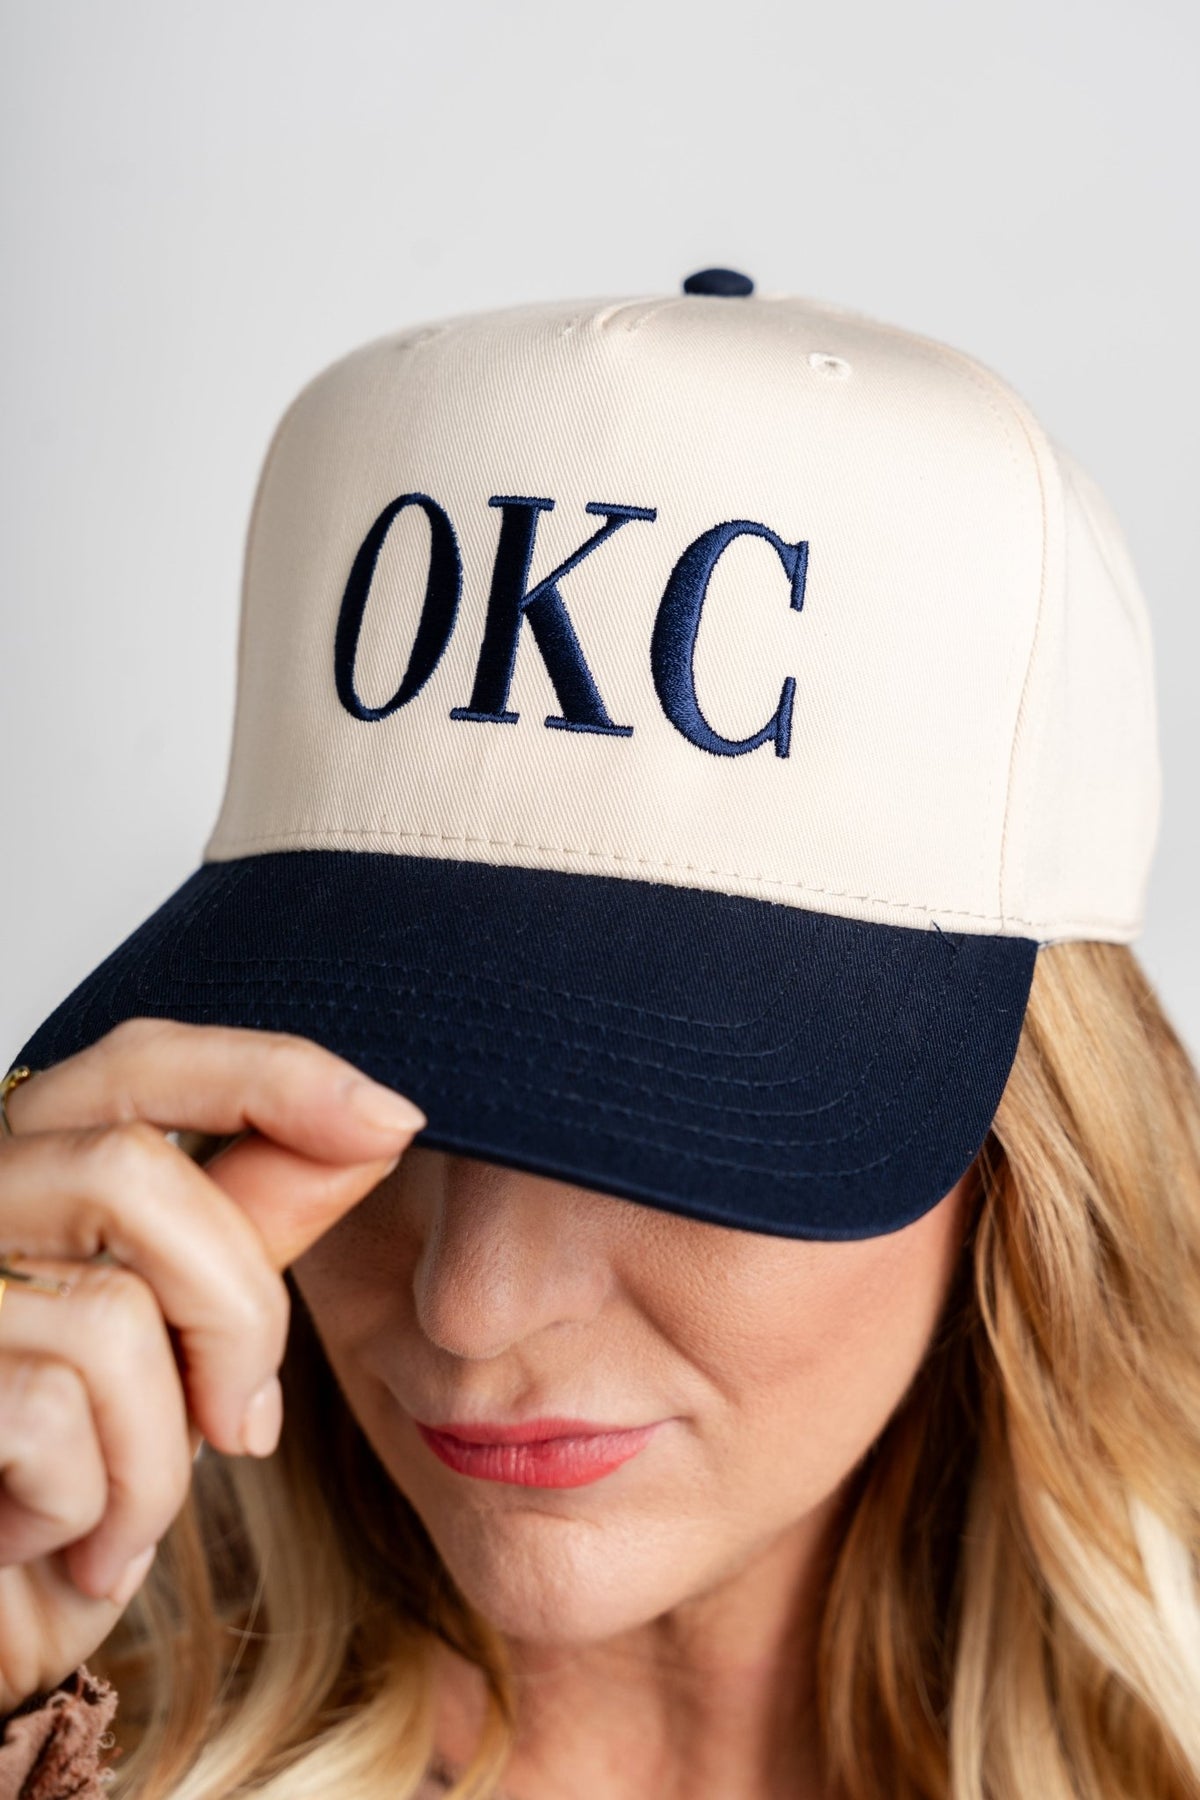 OKC vogue two tone hat natural/navy - Trendy Hats at Lush Fashion Lounge Boutique in Oklahoma City